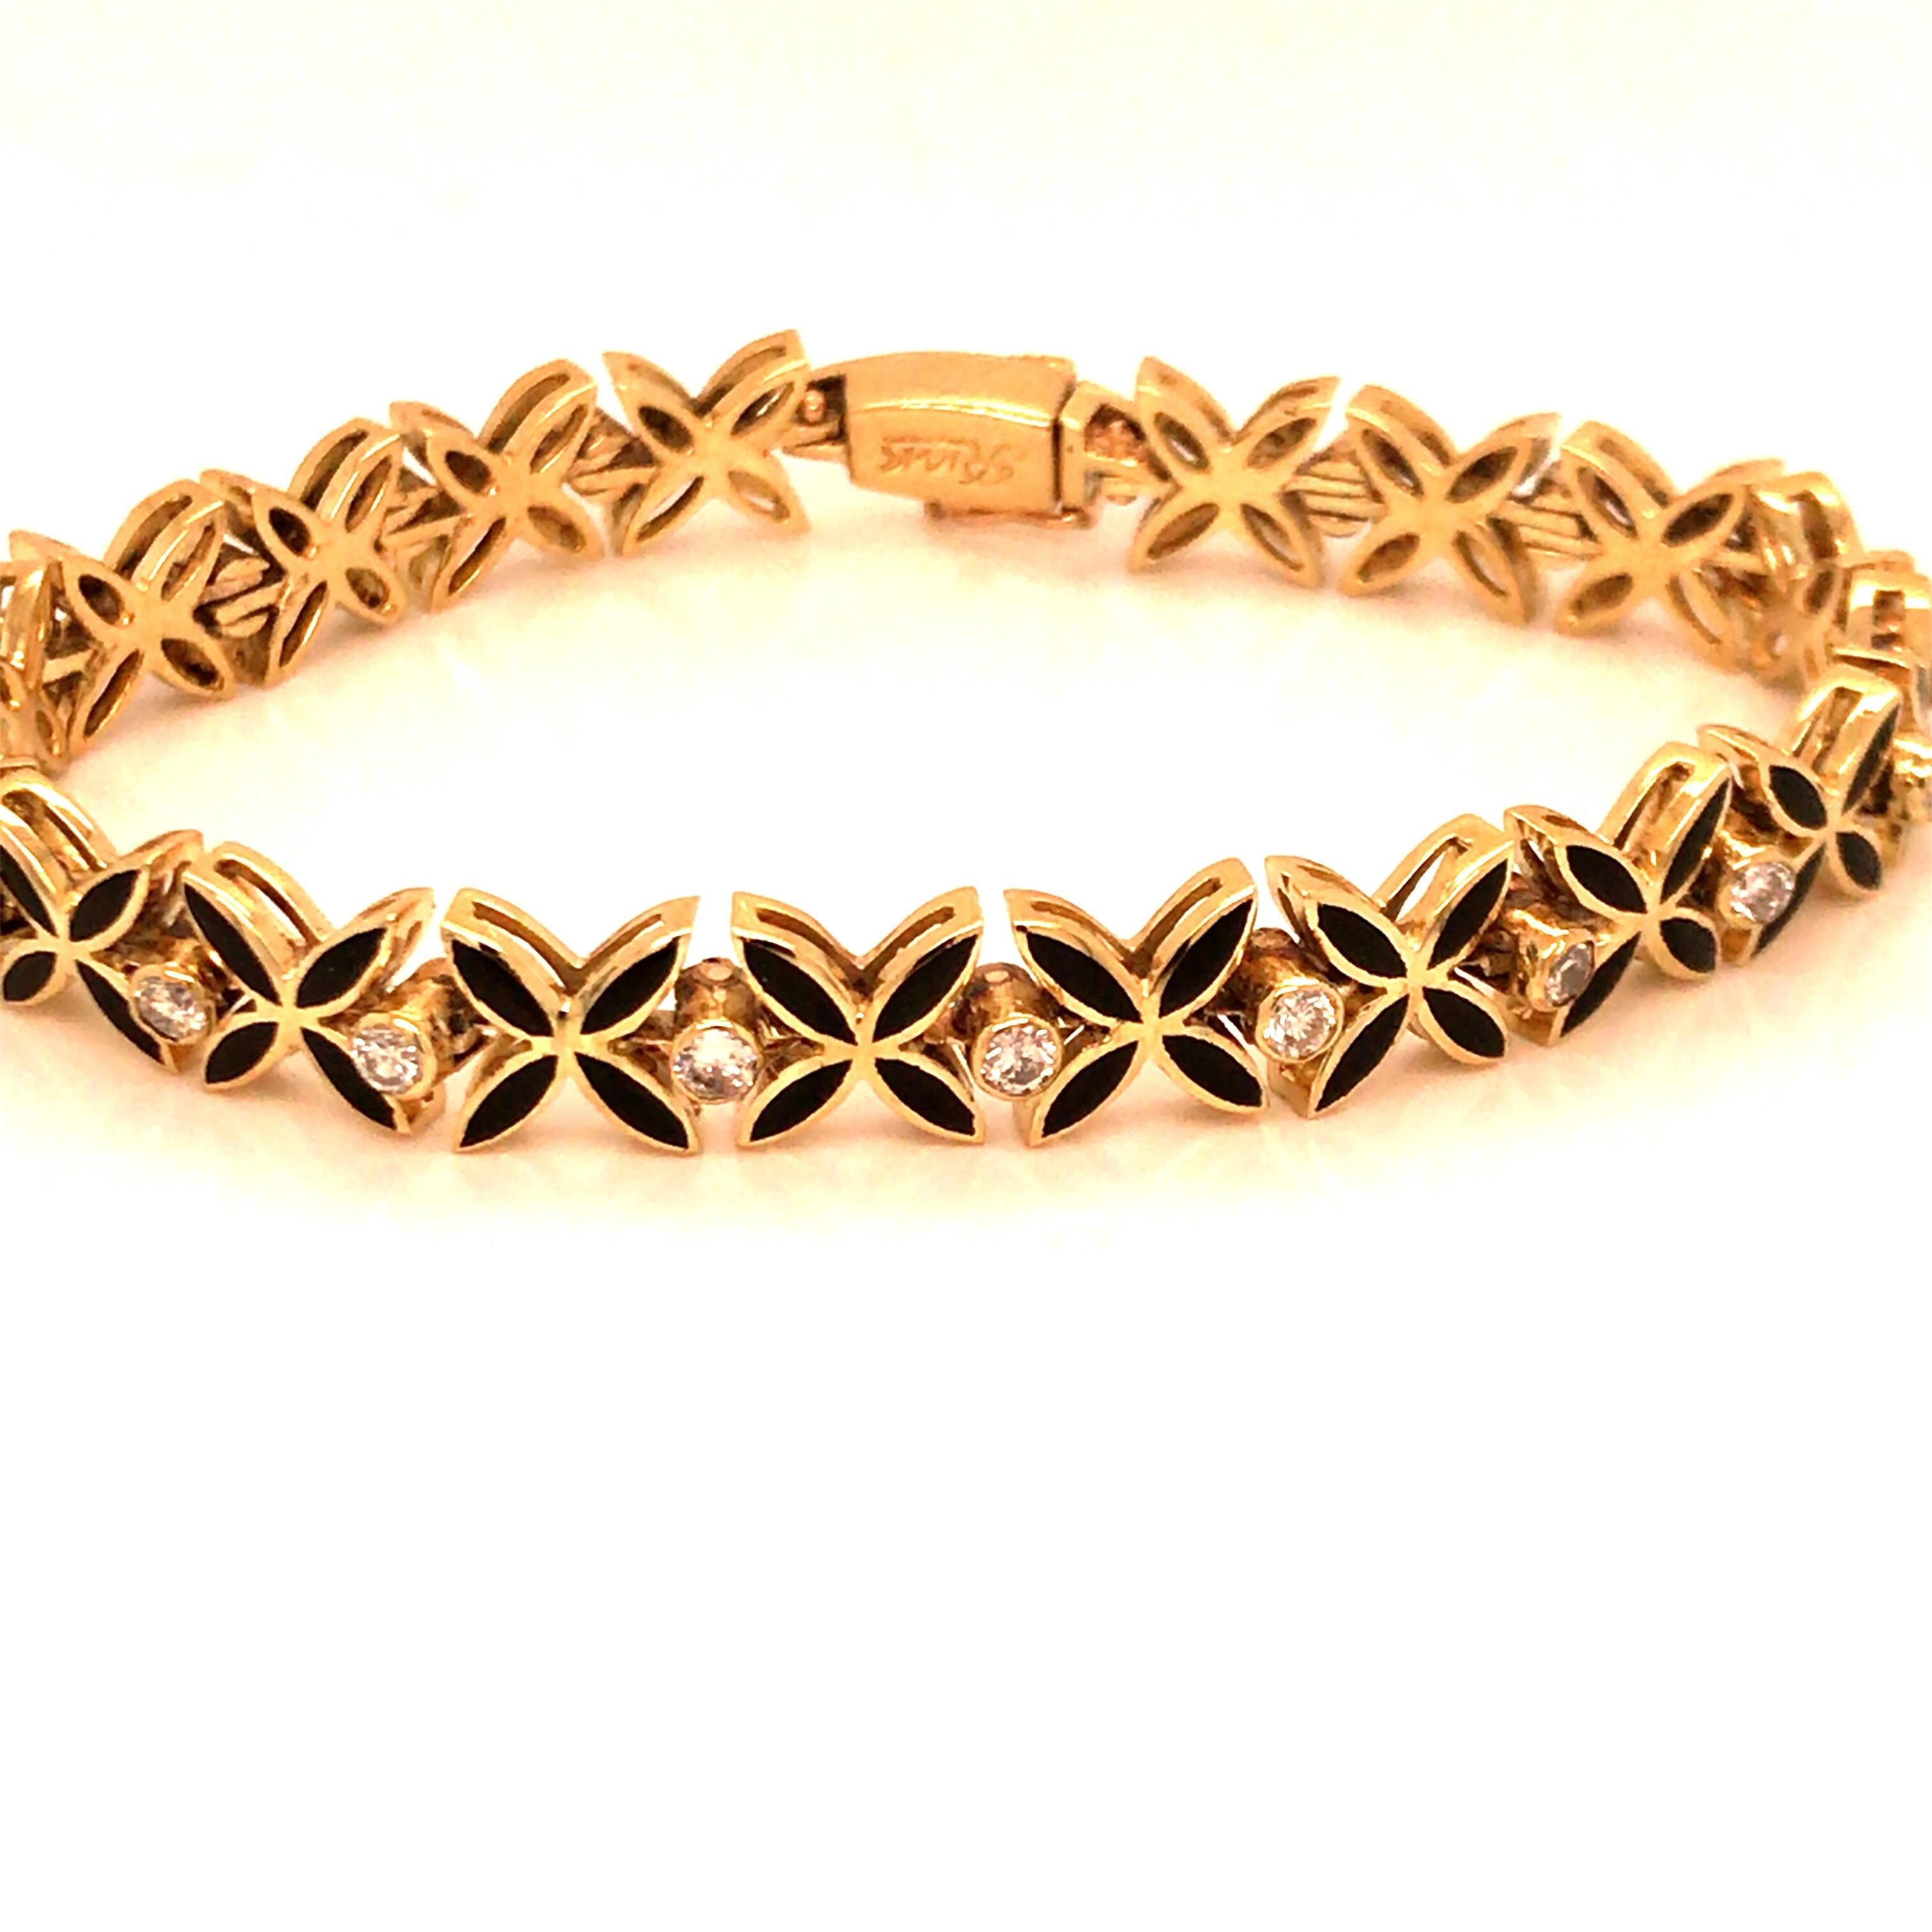 Vintage 1960's 14kt Yellow gold diamond and black enameled bracelet with 18 round cut diamonds - weighing approximately .75ct total, G/H color, SI1/SI2 clarity. Each diamond is bezel set in between an “x” link made up with 4 sections of a marquis